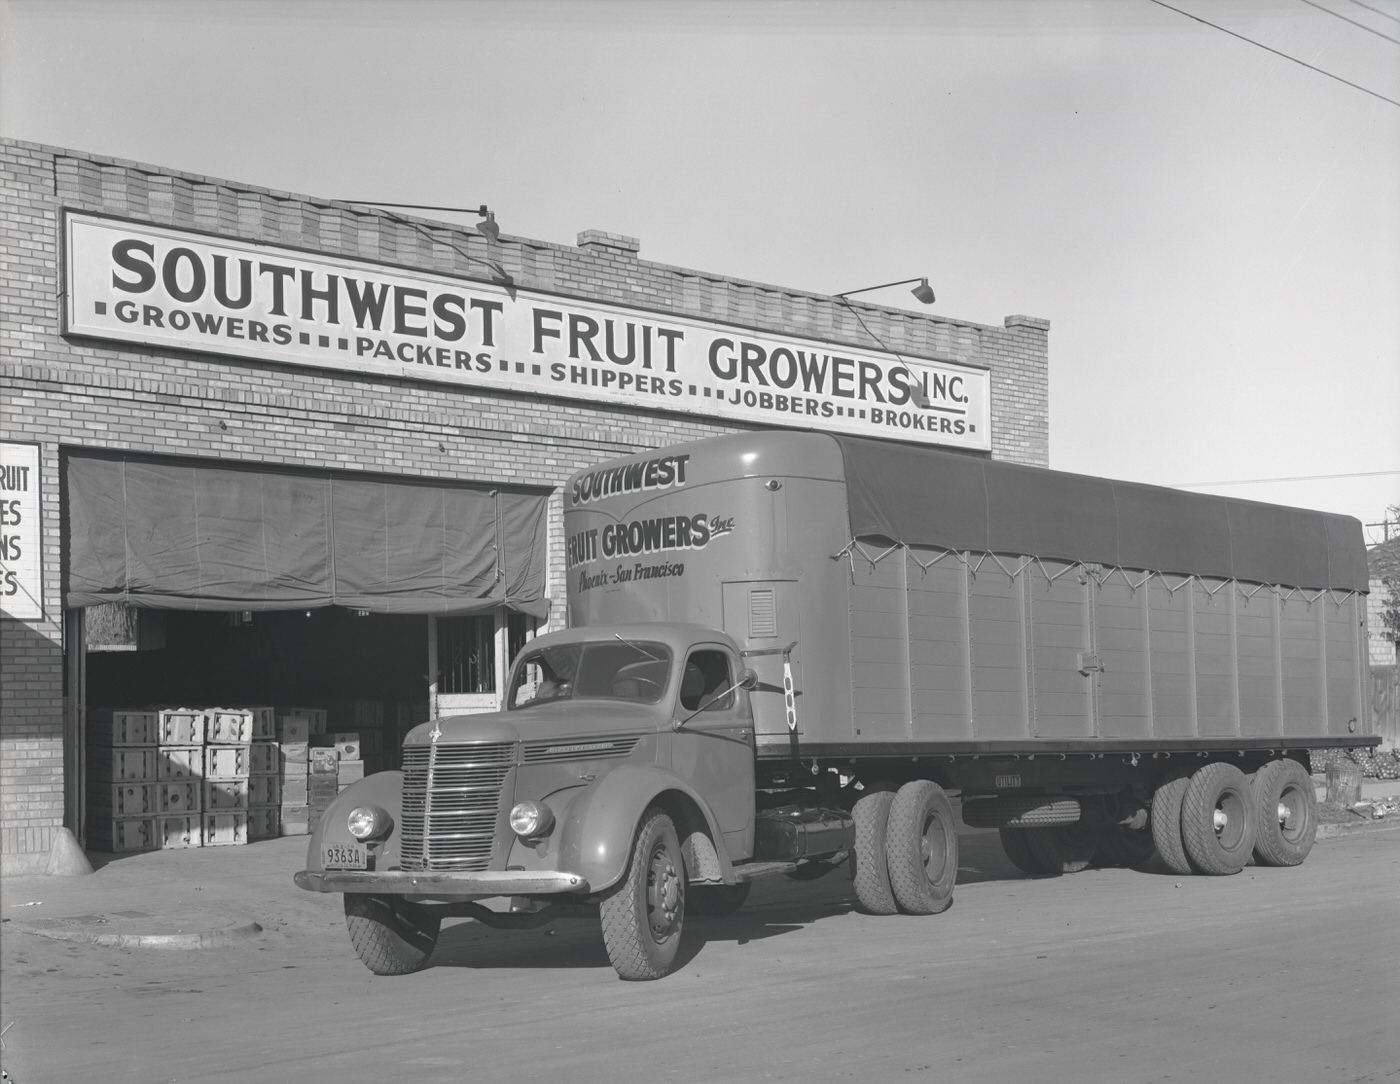 Southwest Fruit Growers Building Exterior and Truck, 1930s